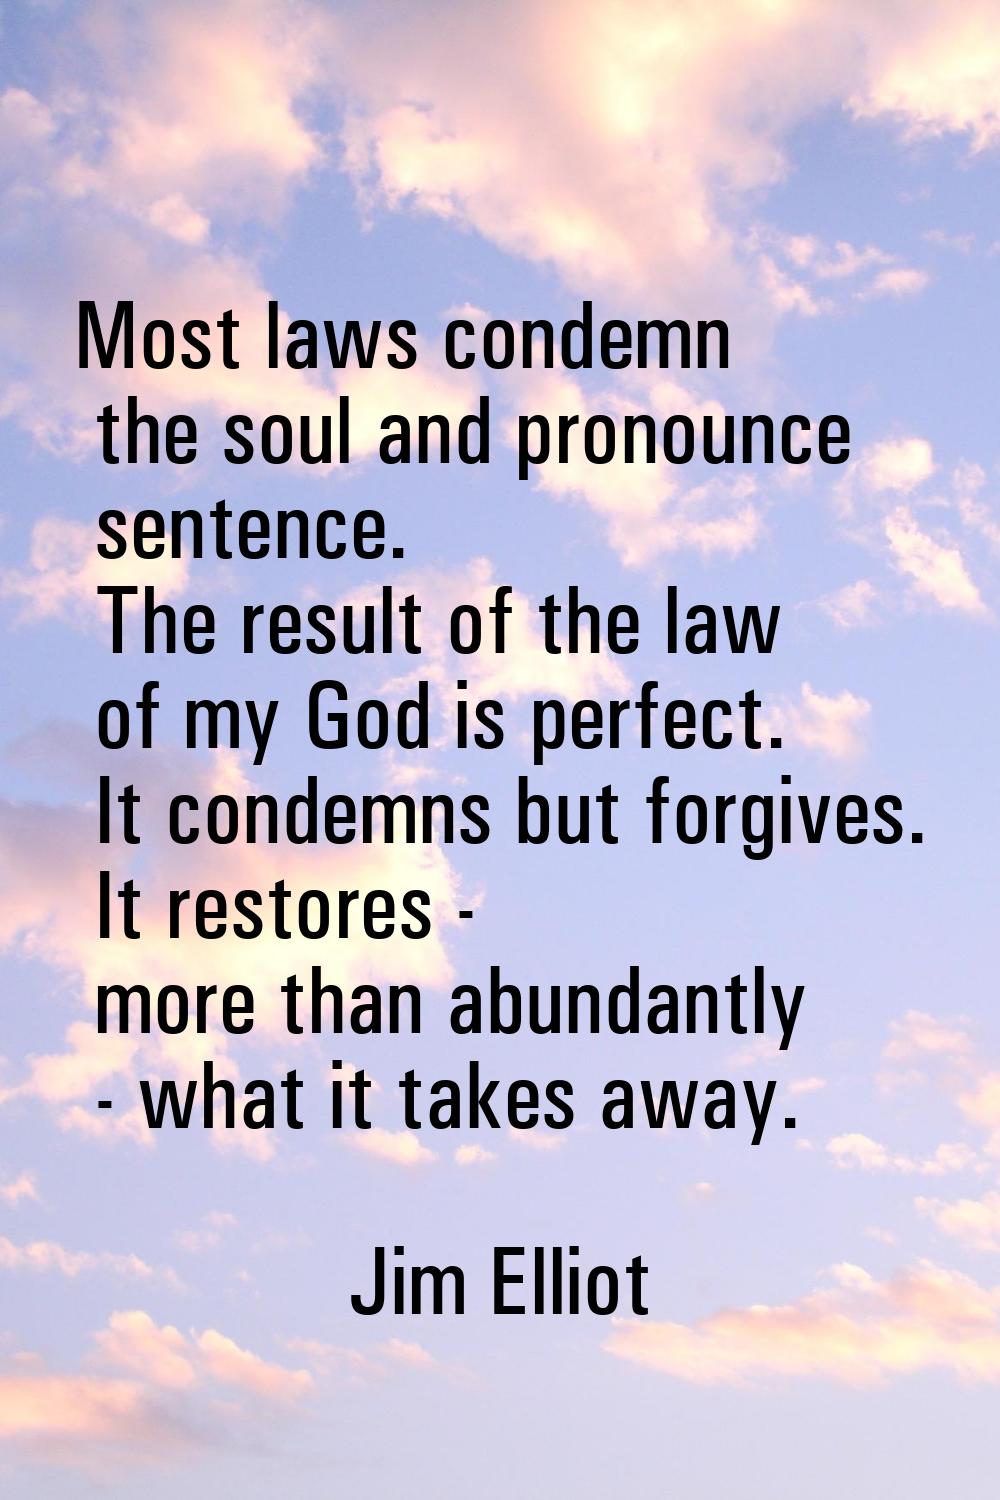 Most laws condemn the soul and pronounce sentence. The result of the law of my God is perfect. It c